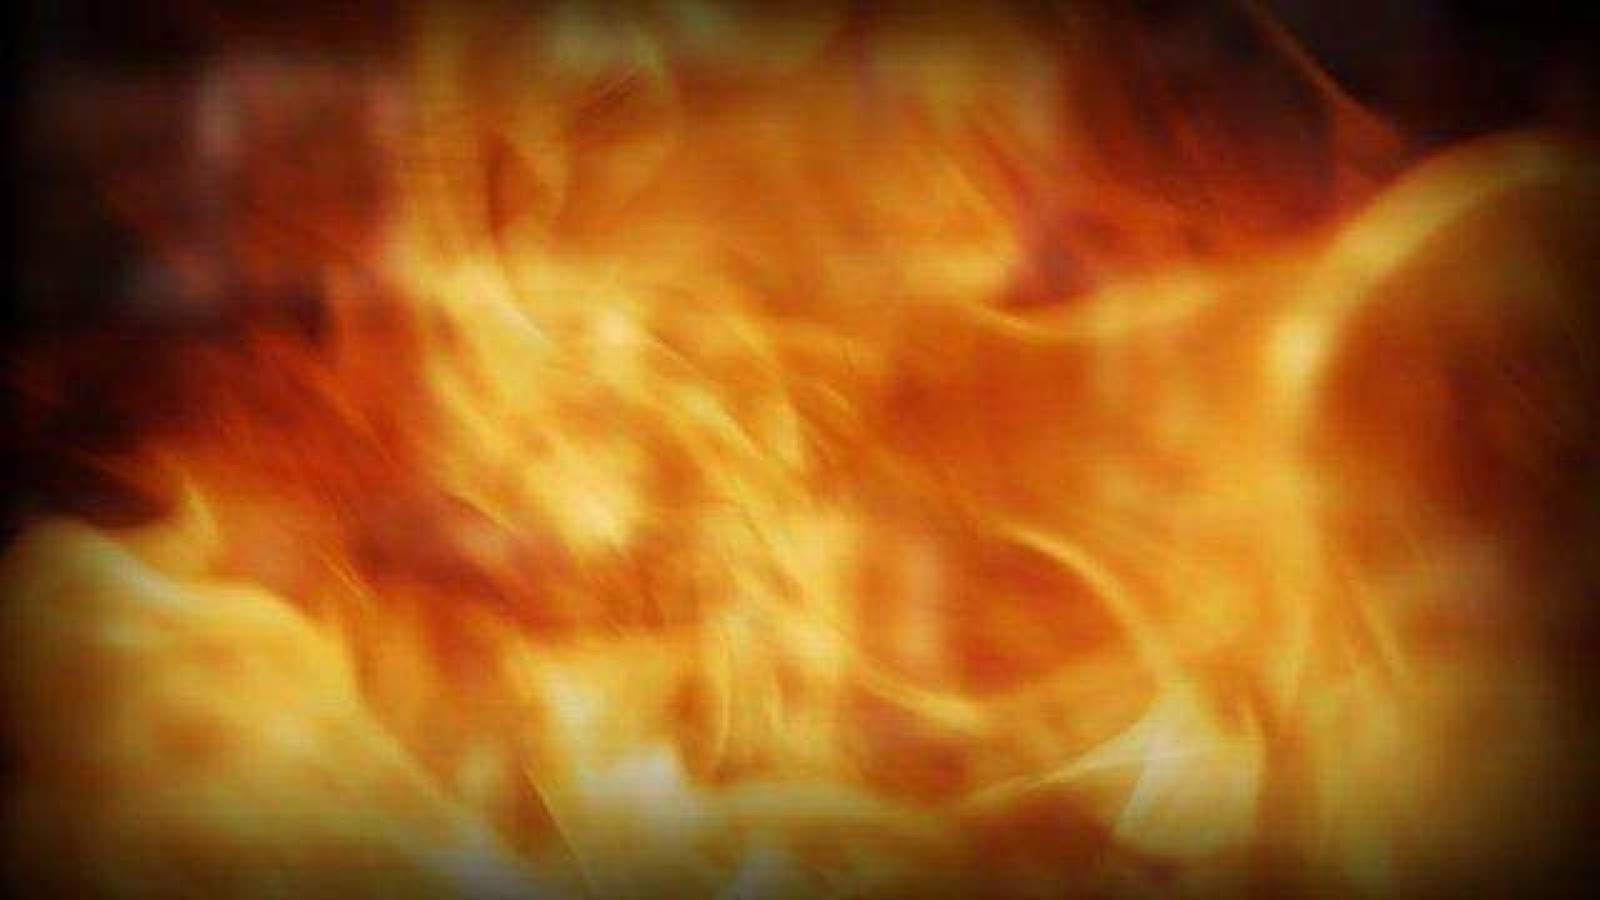 Several apartments in Danville damaged in building fire